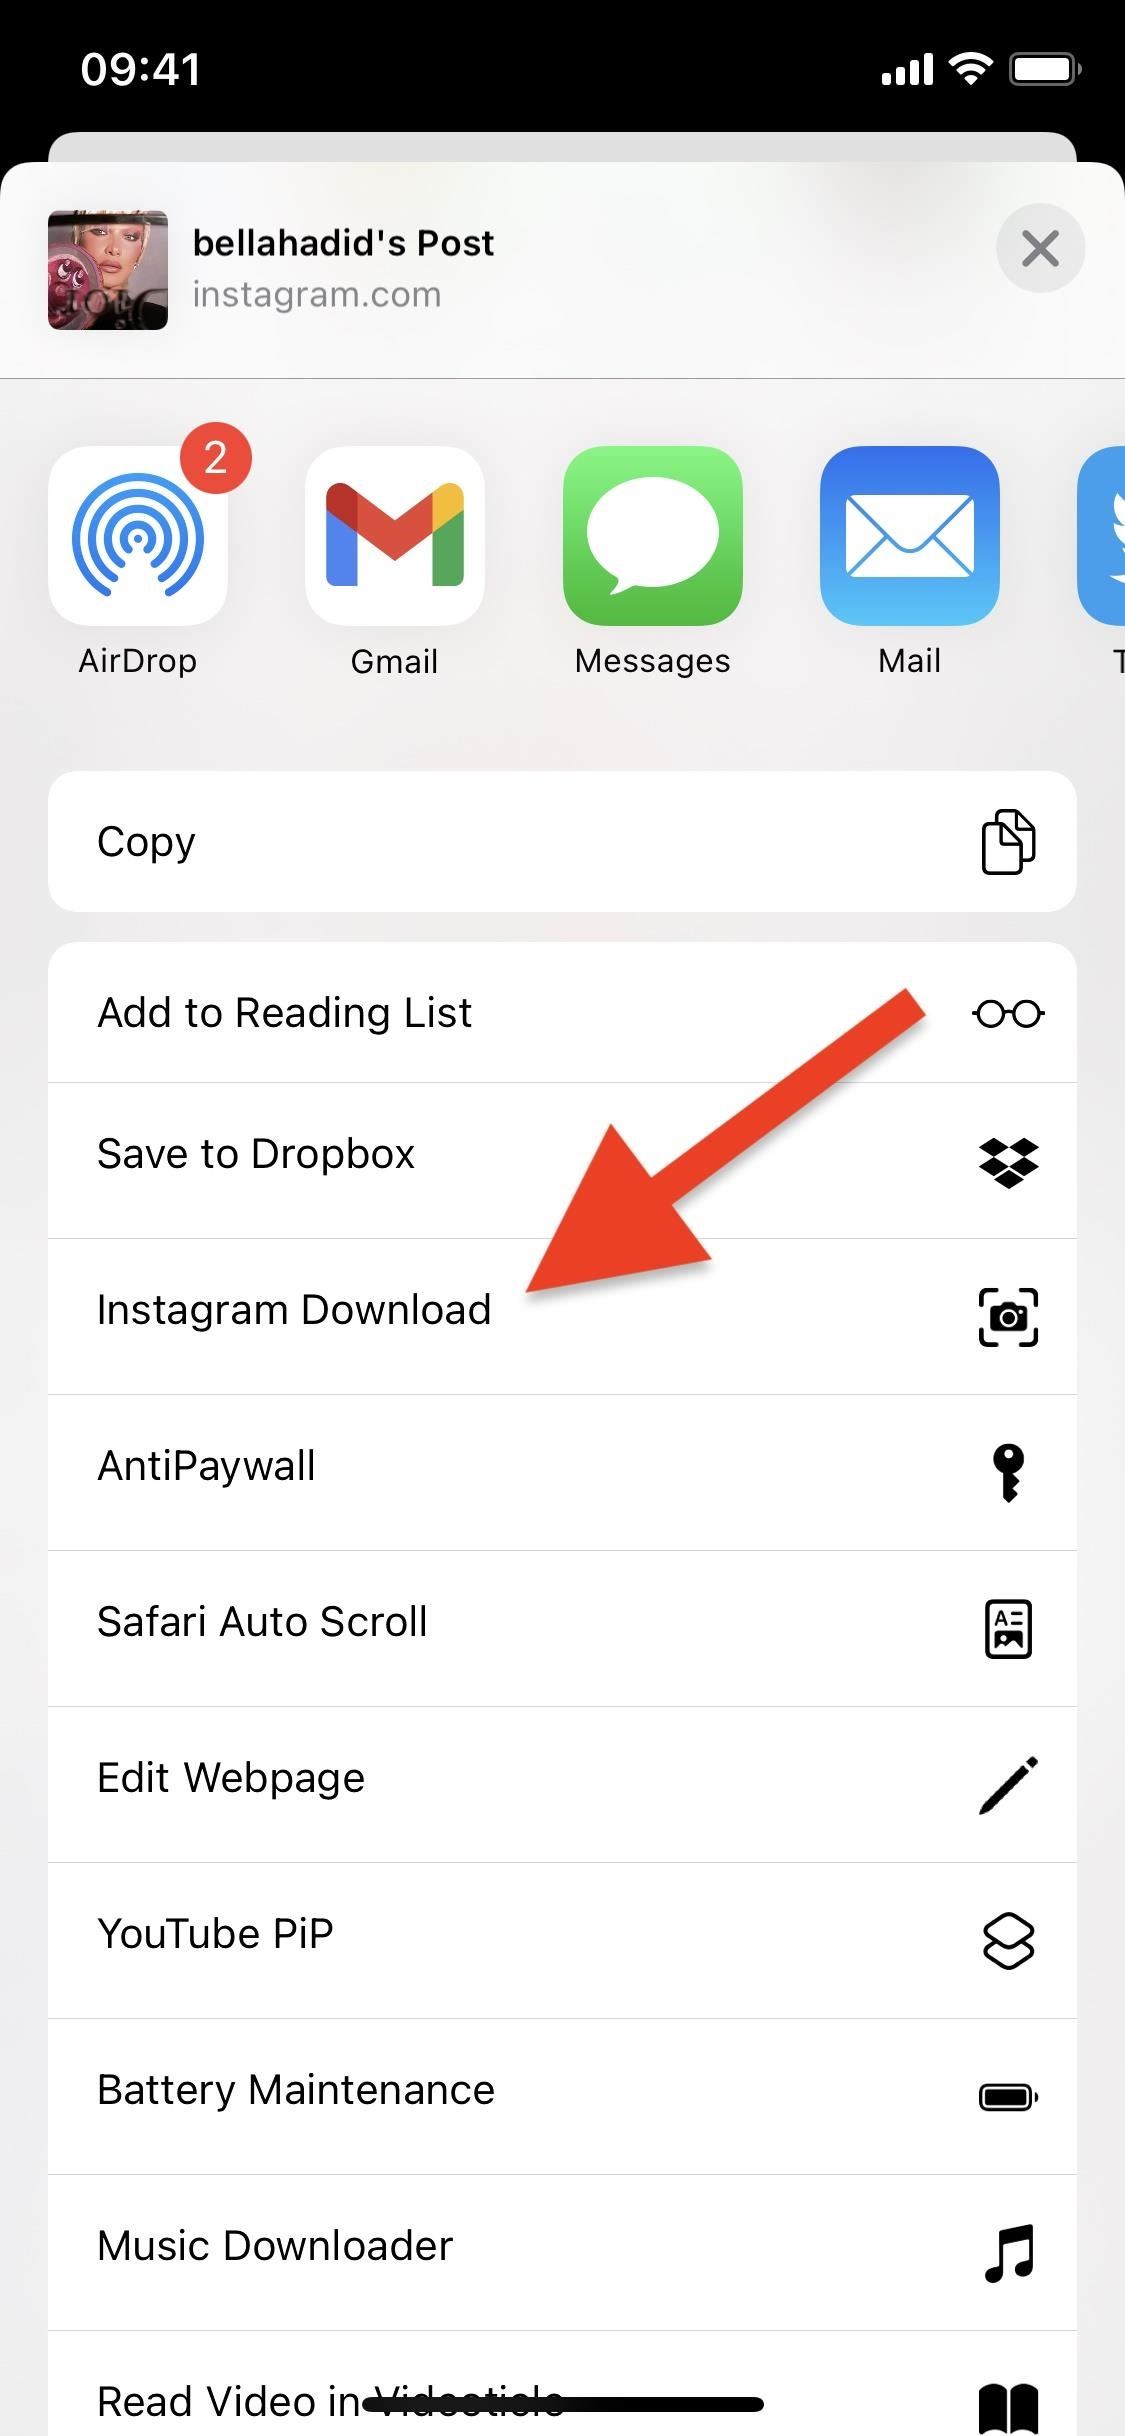 Download Photos & Videos from Instagram Posts & Stories Using This Shortcut for iPhone